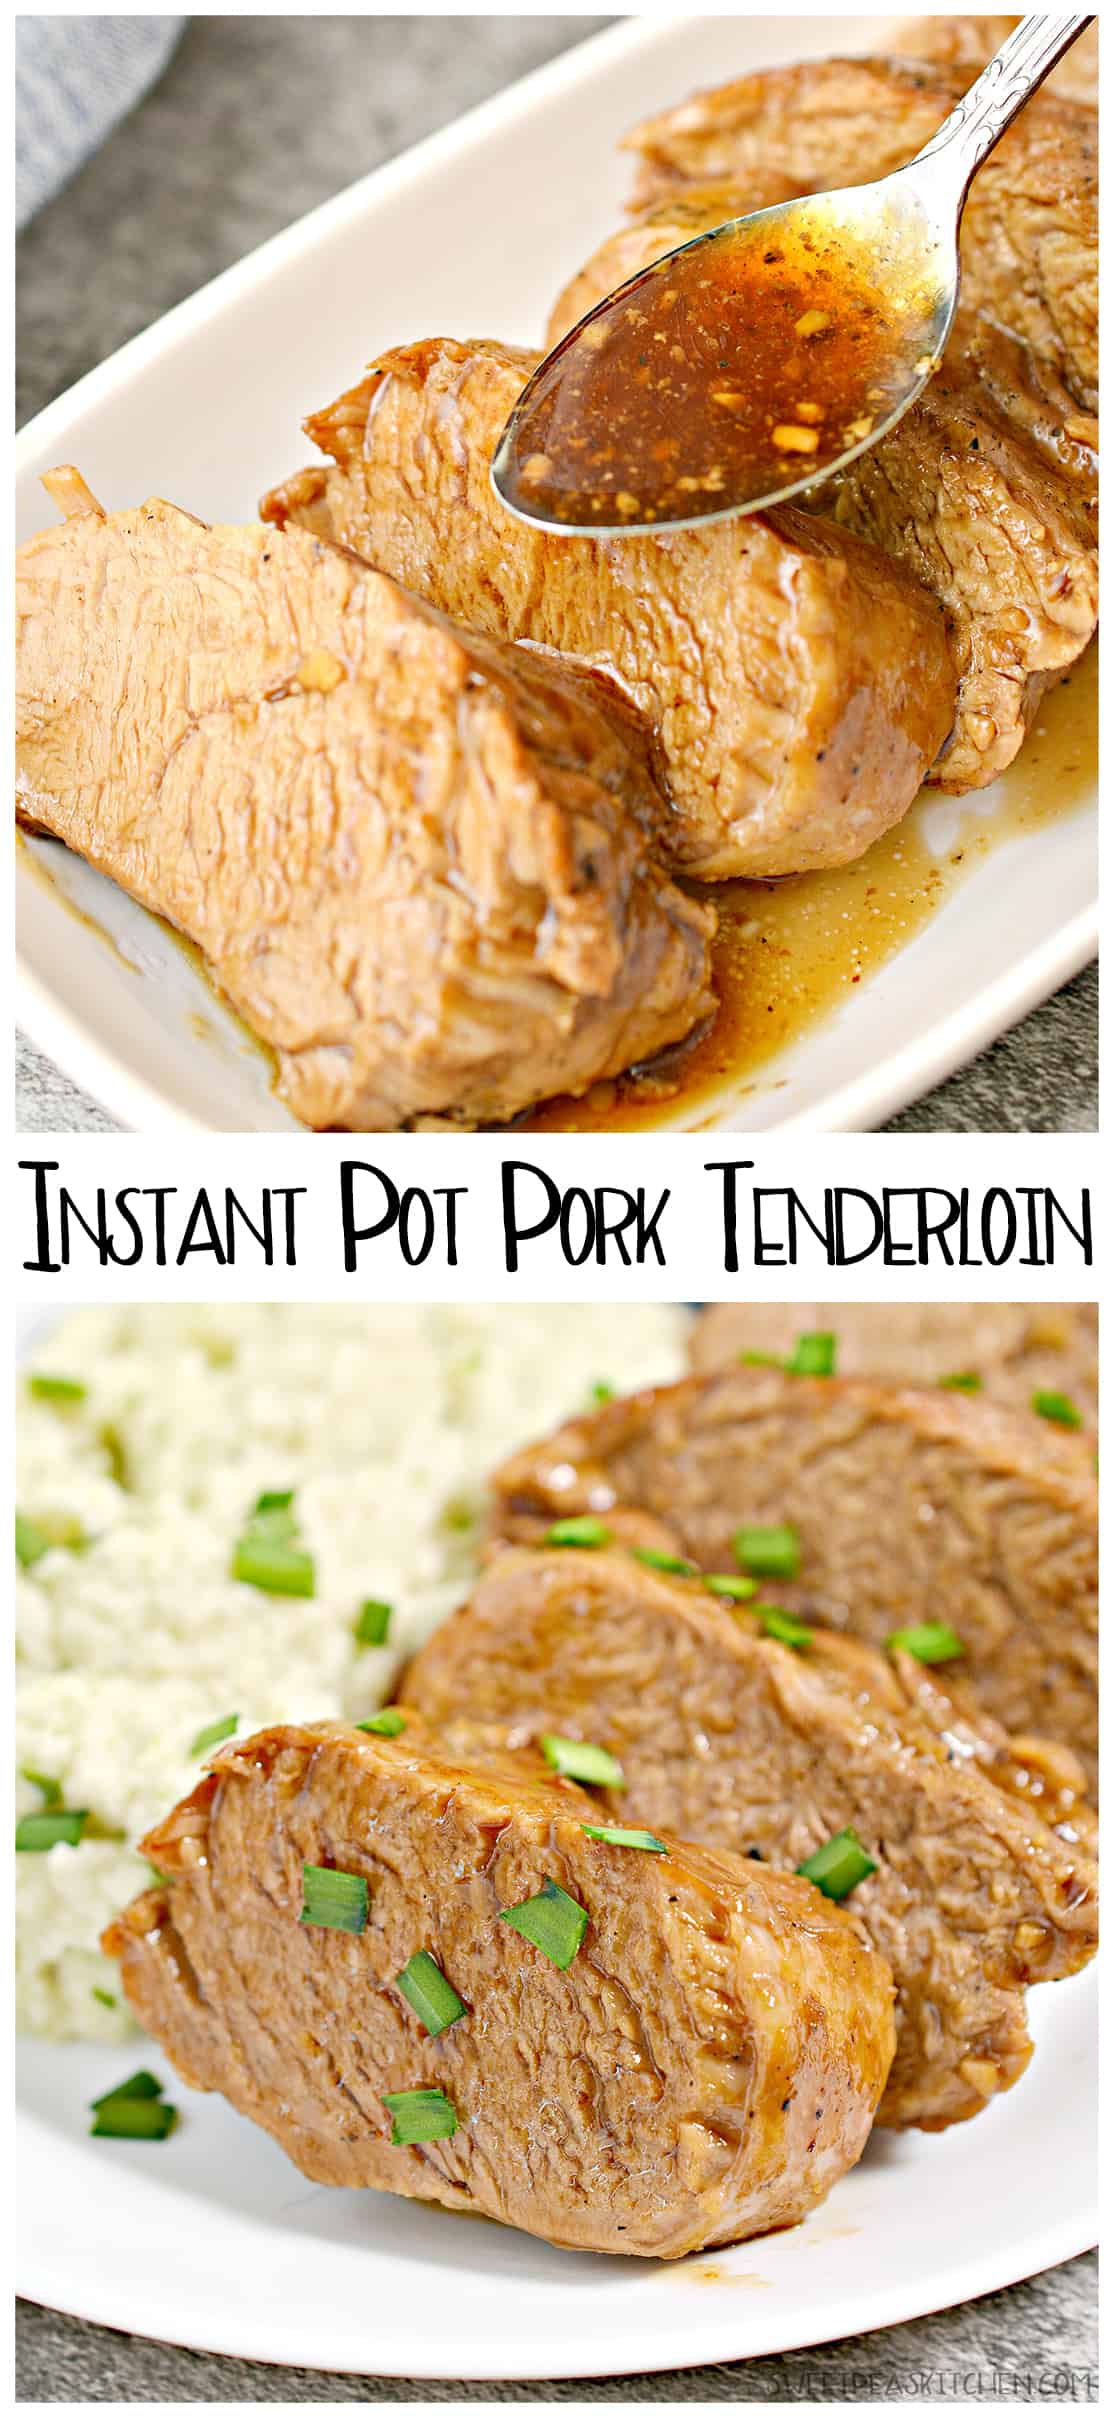 Looking for the best-tasting pork tenderloin recipe? One bite of Instant Pot Pork loin recipe and you will never want to make any other recipe again. This pork loin is moist and flavorful and done in no time.